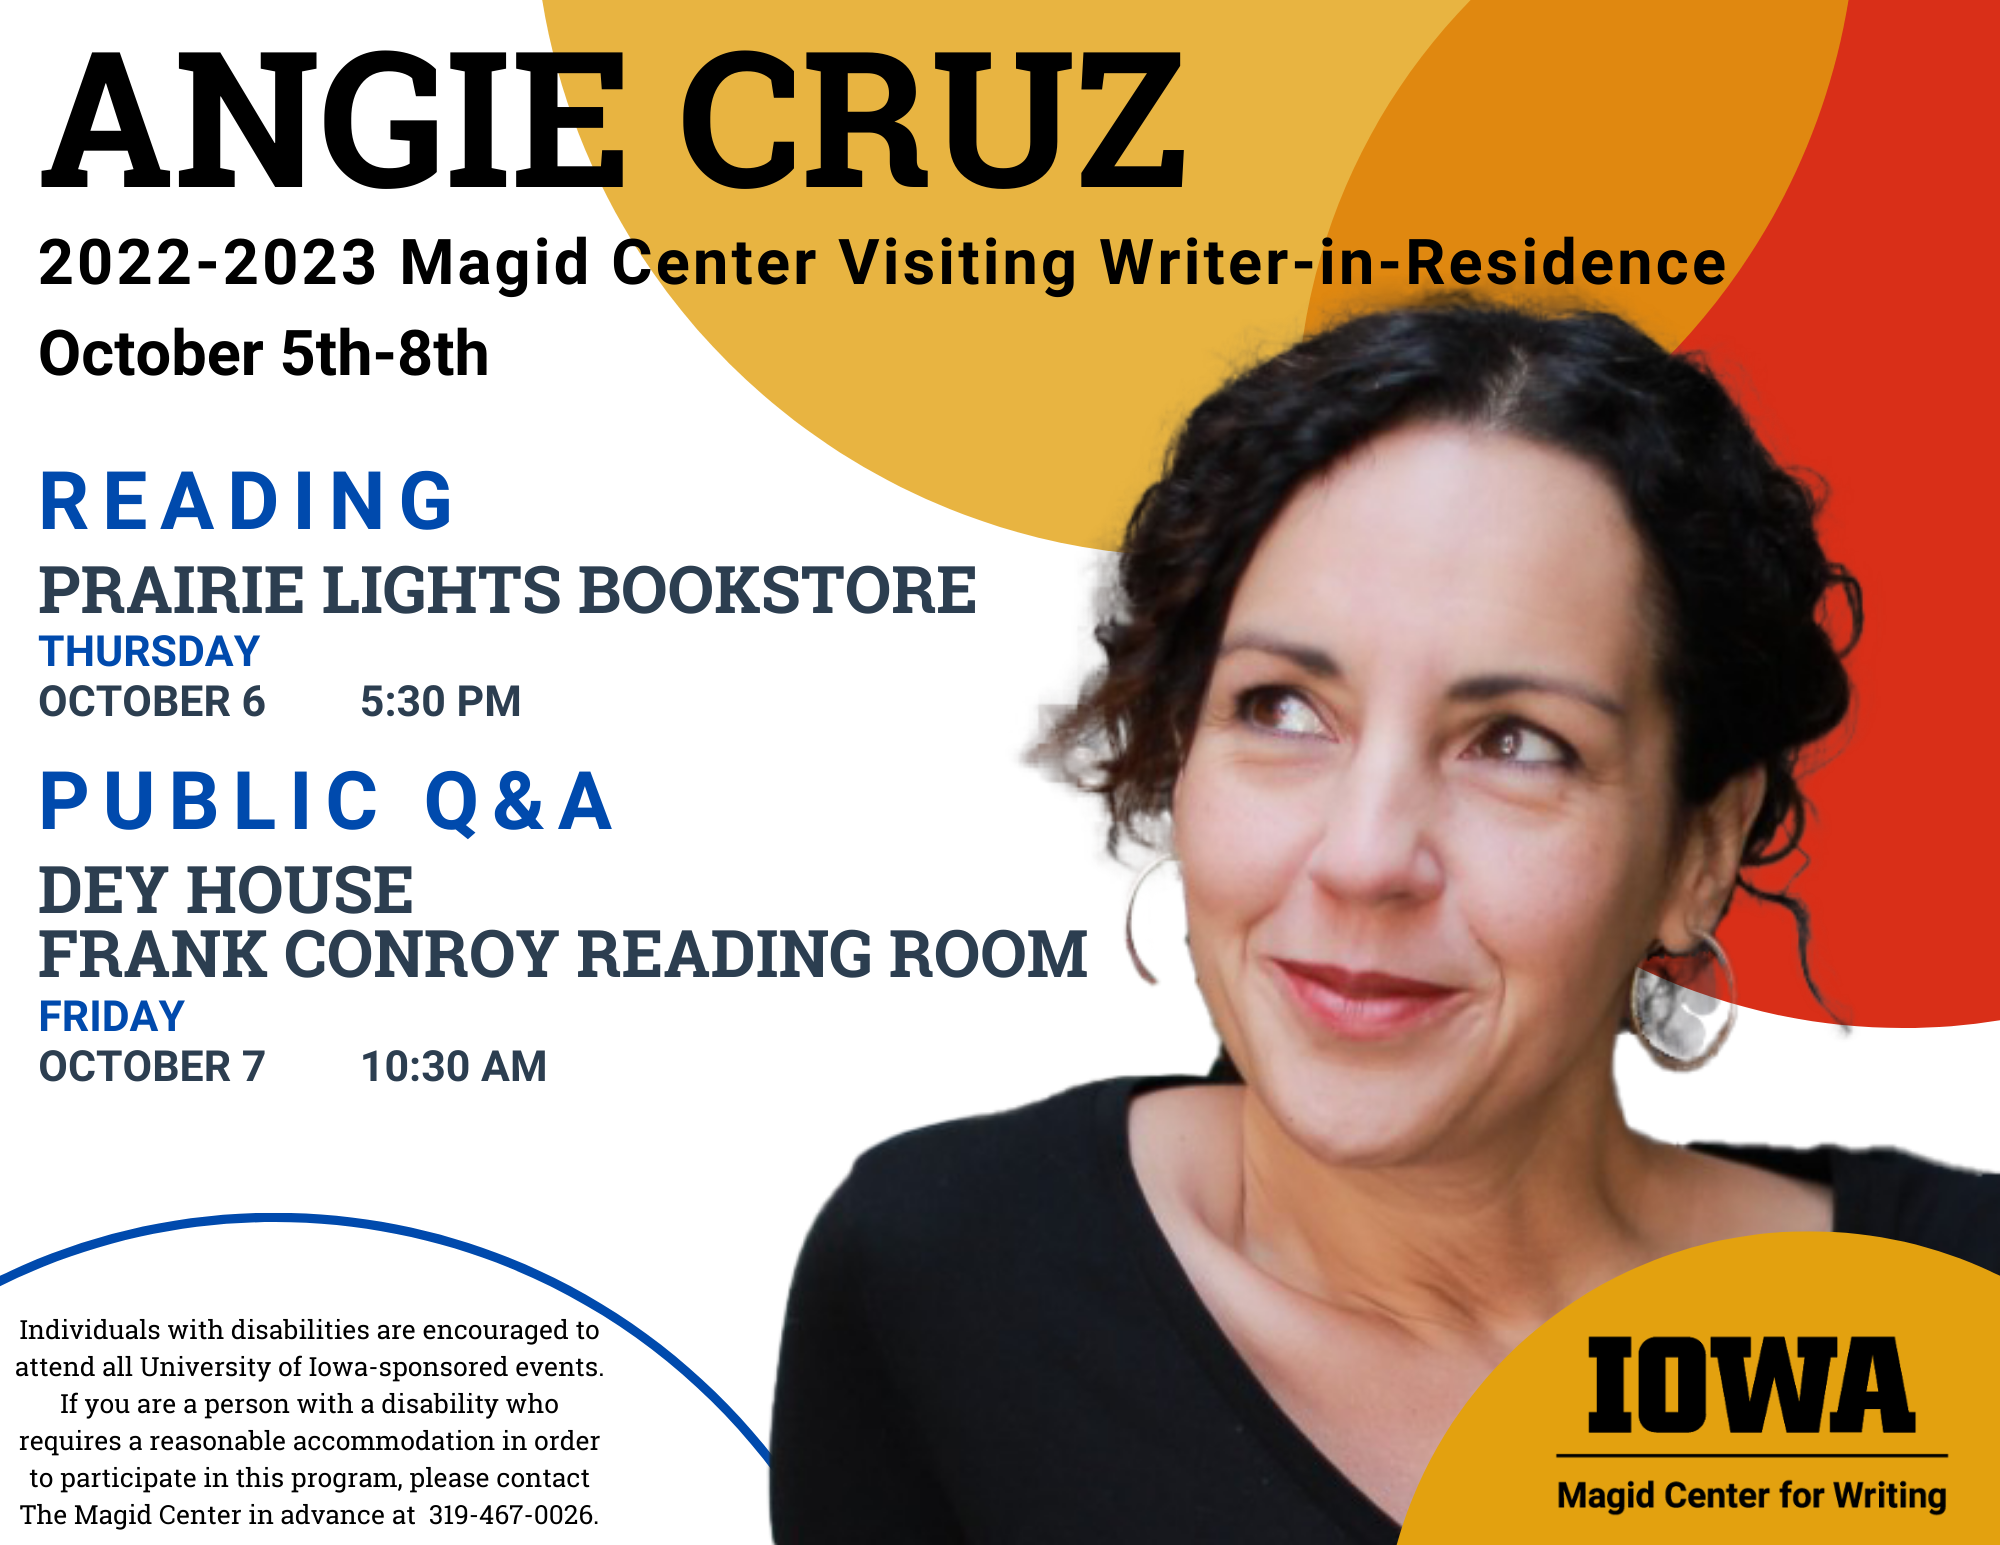 Photo of writer Angie Cruz with colorful circles and University of Iowa logo. Text reads, “Angie Cruz, 2022-2023 Magid Center Visiting Writer-in-Residence, October 5th through 8th. Reading at Prairie Lights Bookstore, Thursday, October 6, 5:30 PM. Public Q&A at Dey House, Frank Conroy Reading Room, Friday, October 7, 10:30 AM. Contact the Magid Center at 319-467-0026 for accessibility needs or questions.